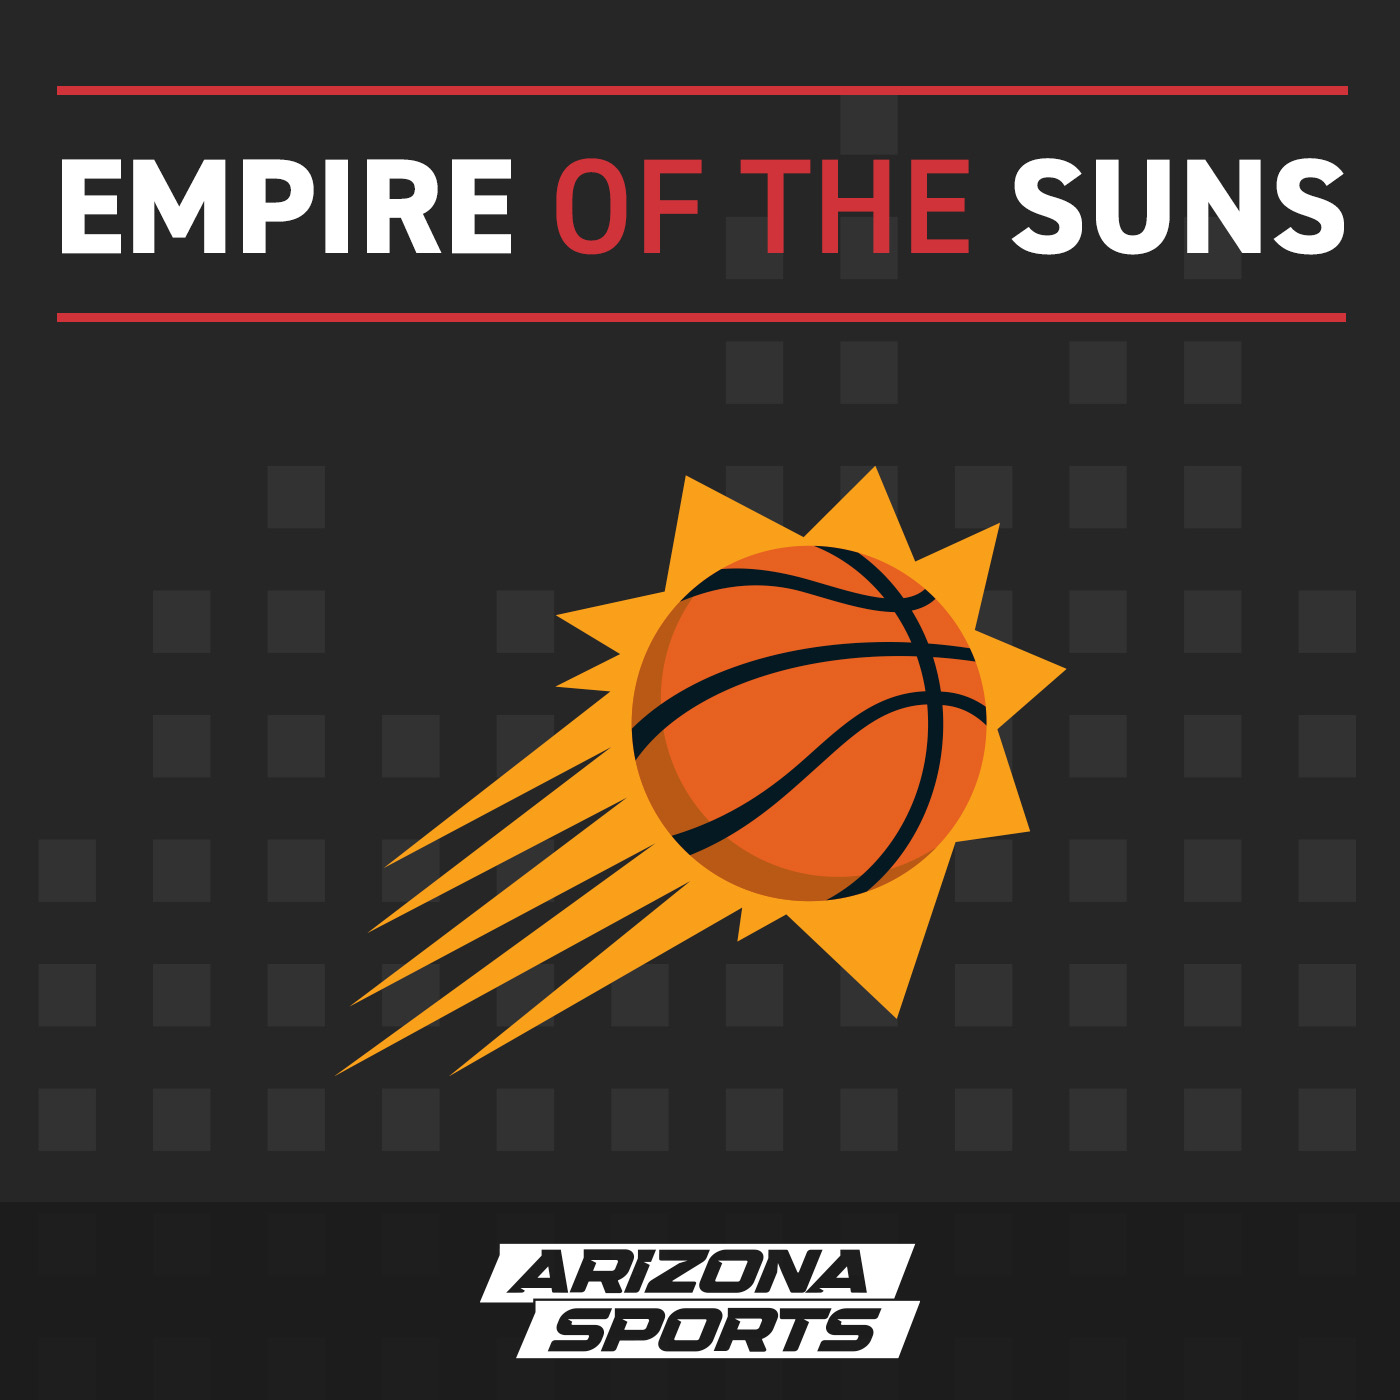 What is left to learn for the Suns? - March 17